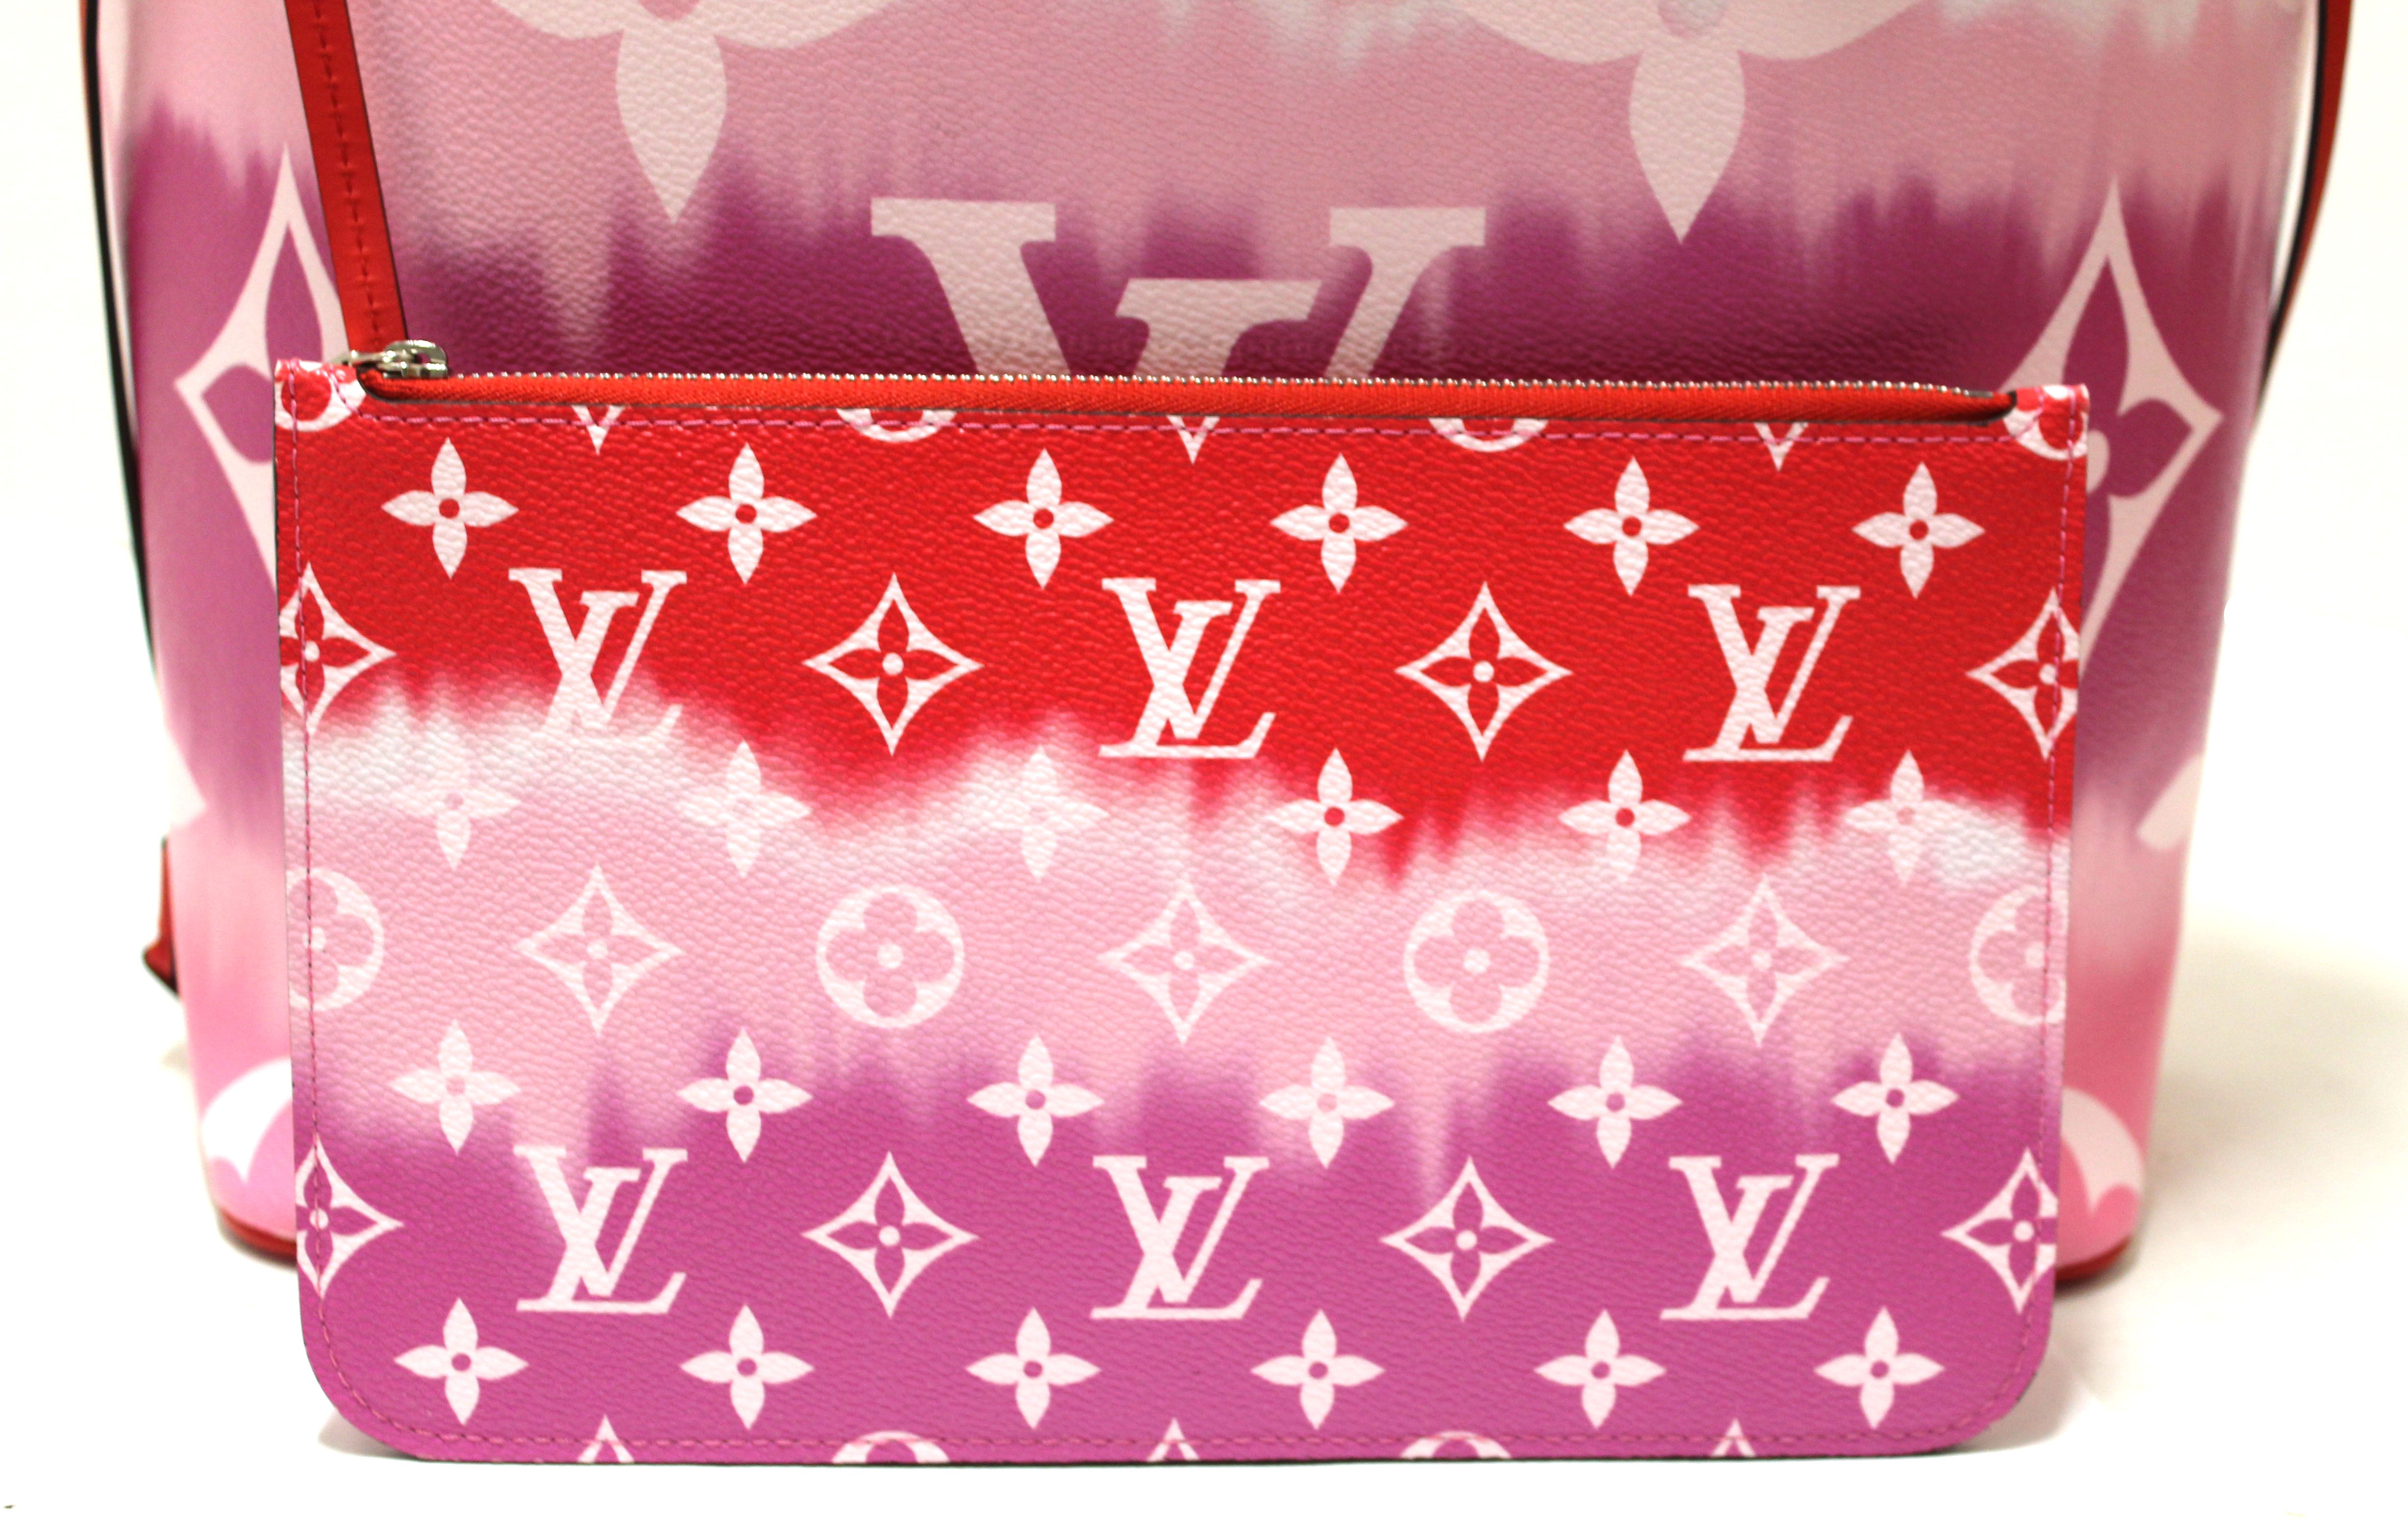 Louis Vuitton Neverfull MM Red Pink Escale Monogram Canvas